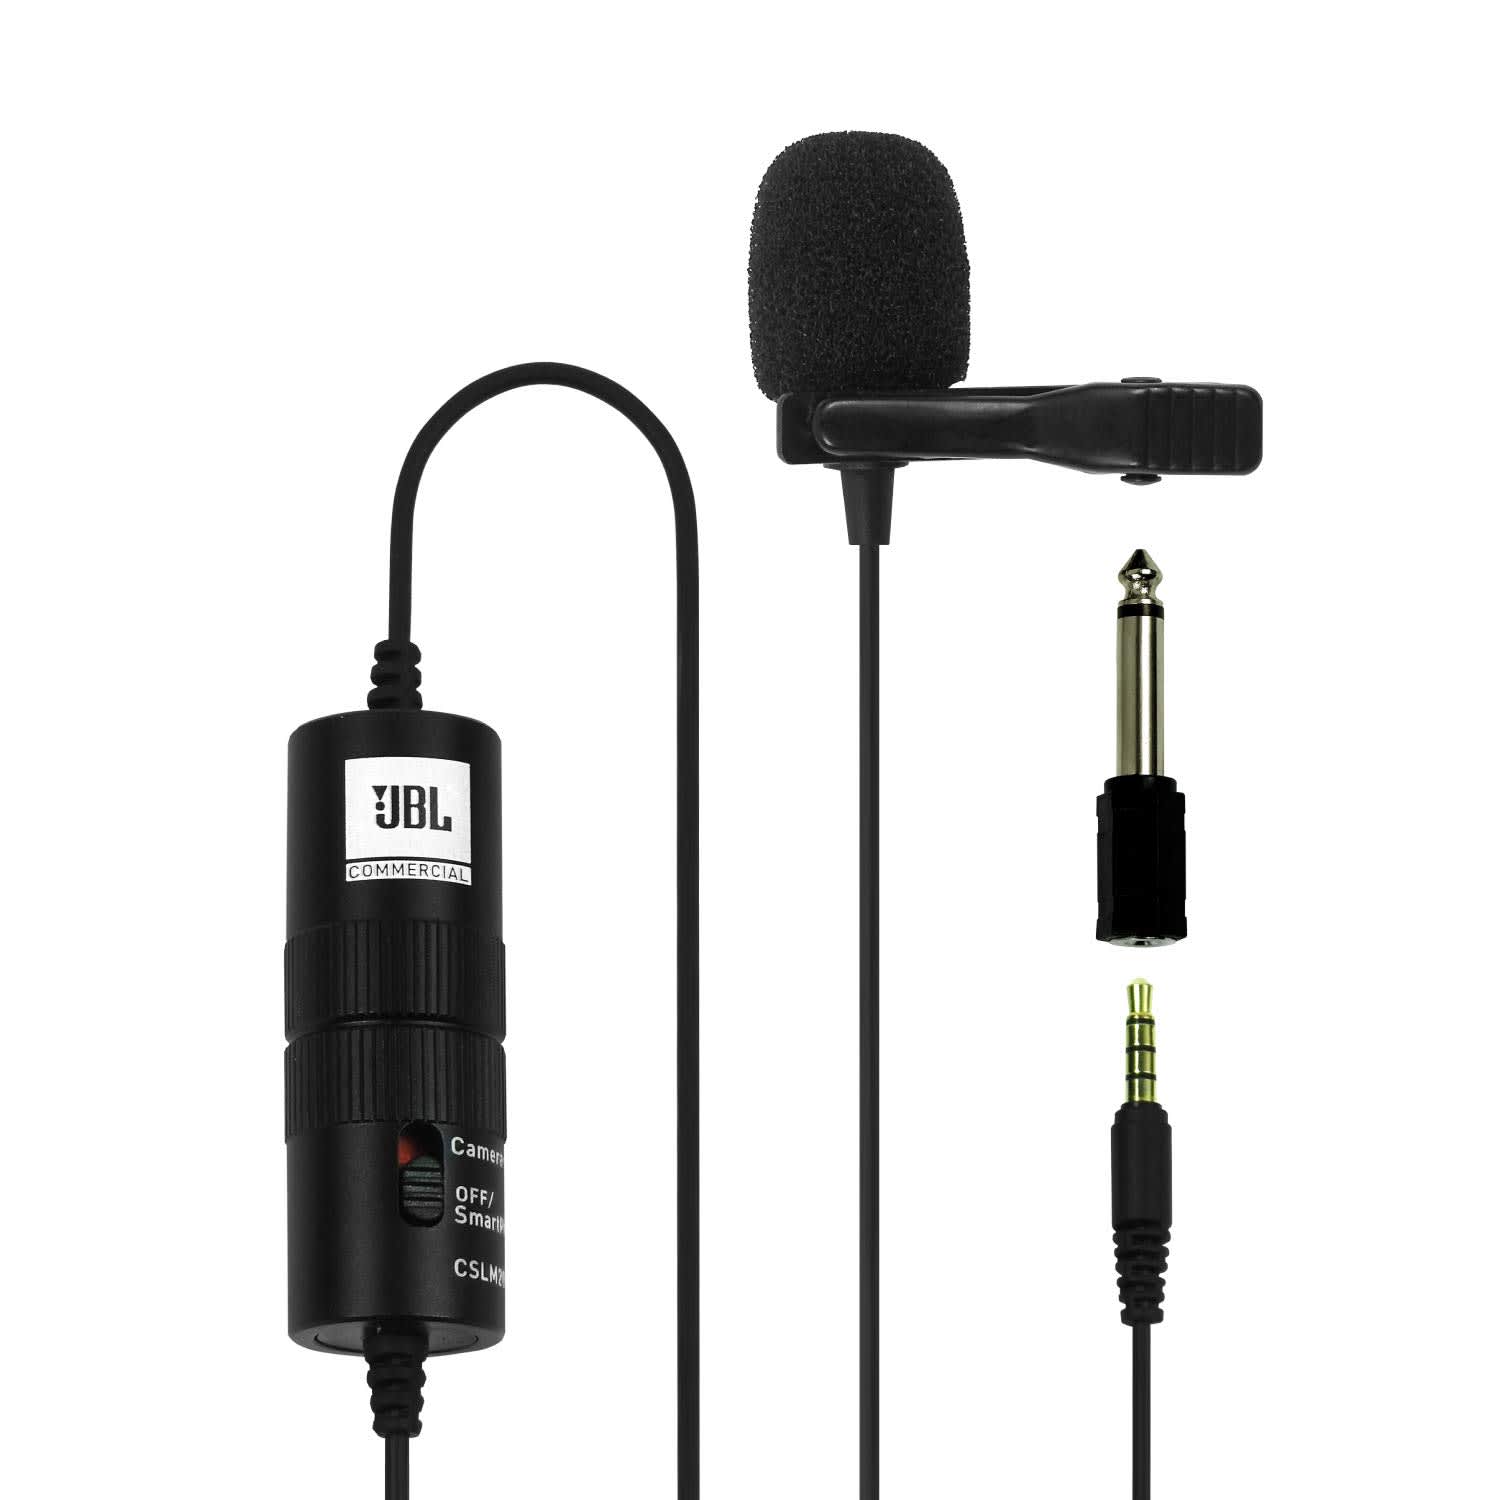 JBL Commercial CSLM20B Auxiliary Omnidirectional Lavalier Microphone